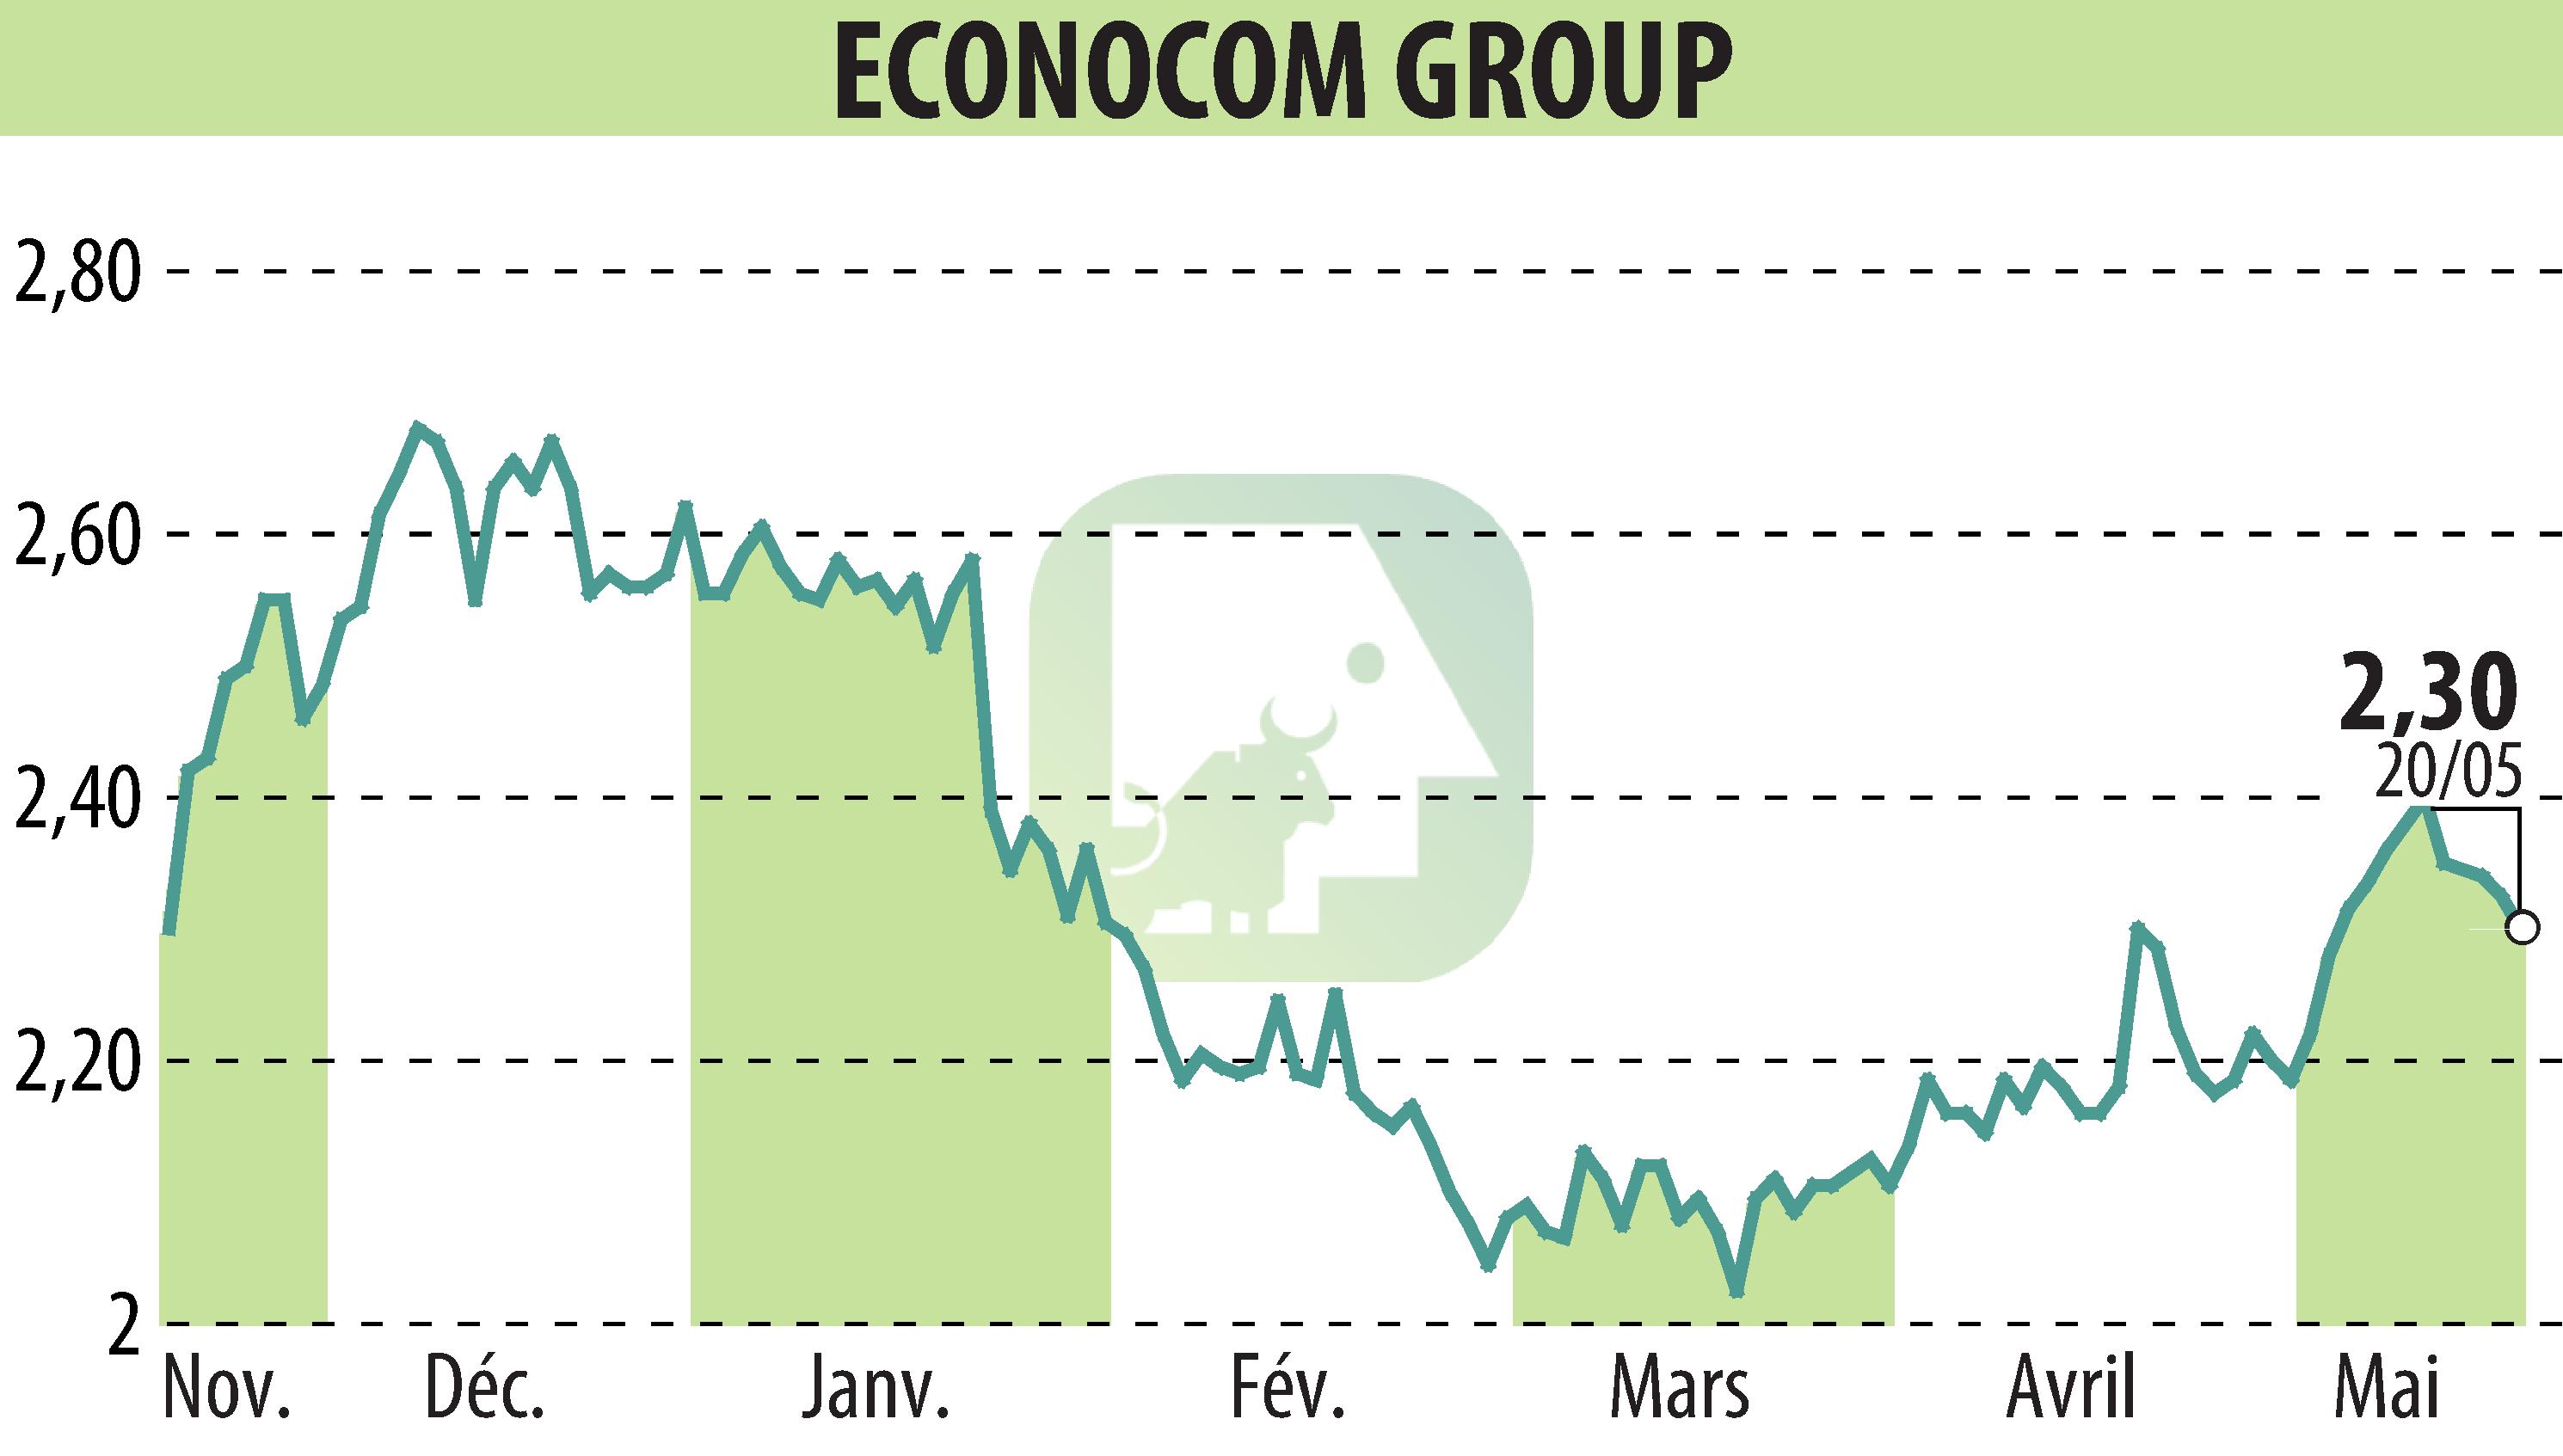 Stock price chart of ECONOCOM GROUP (EBR:ECONB) showing fluctuations.